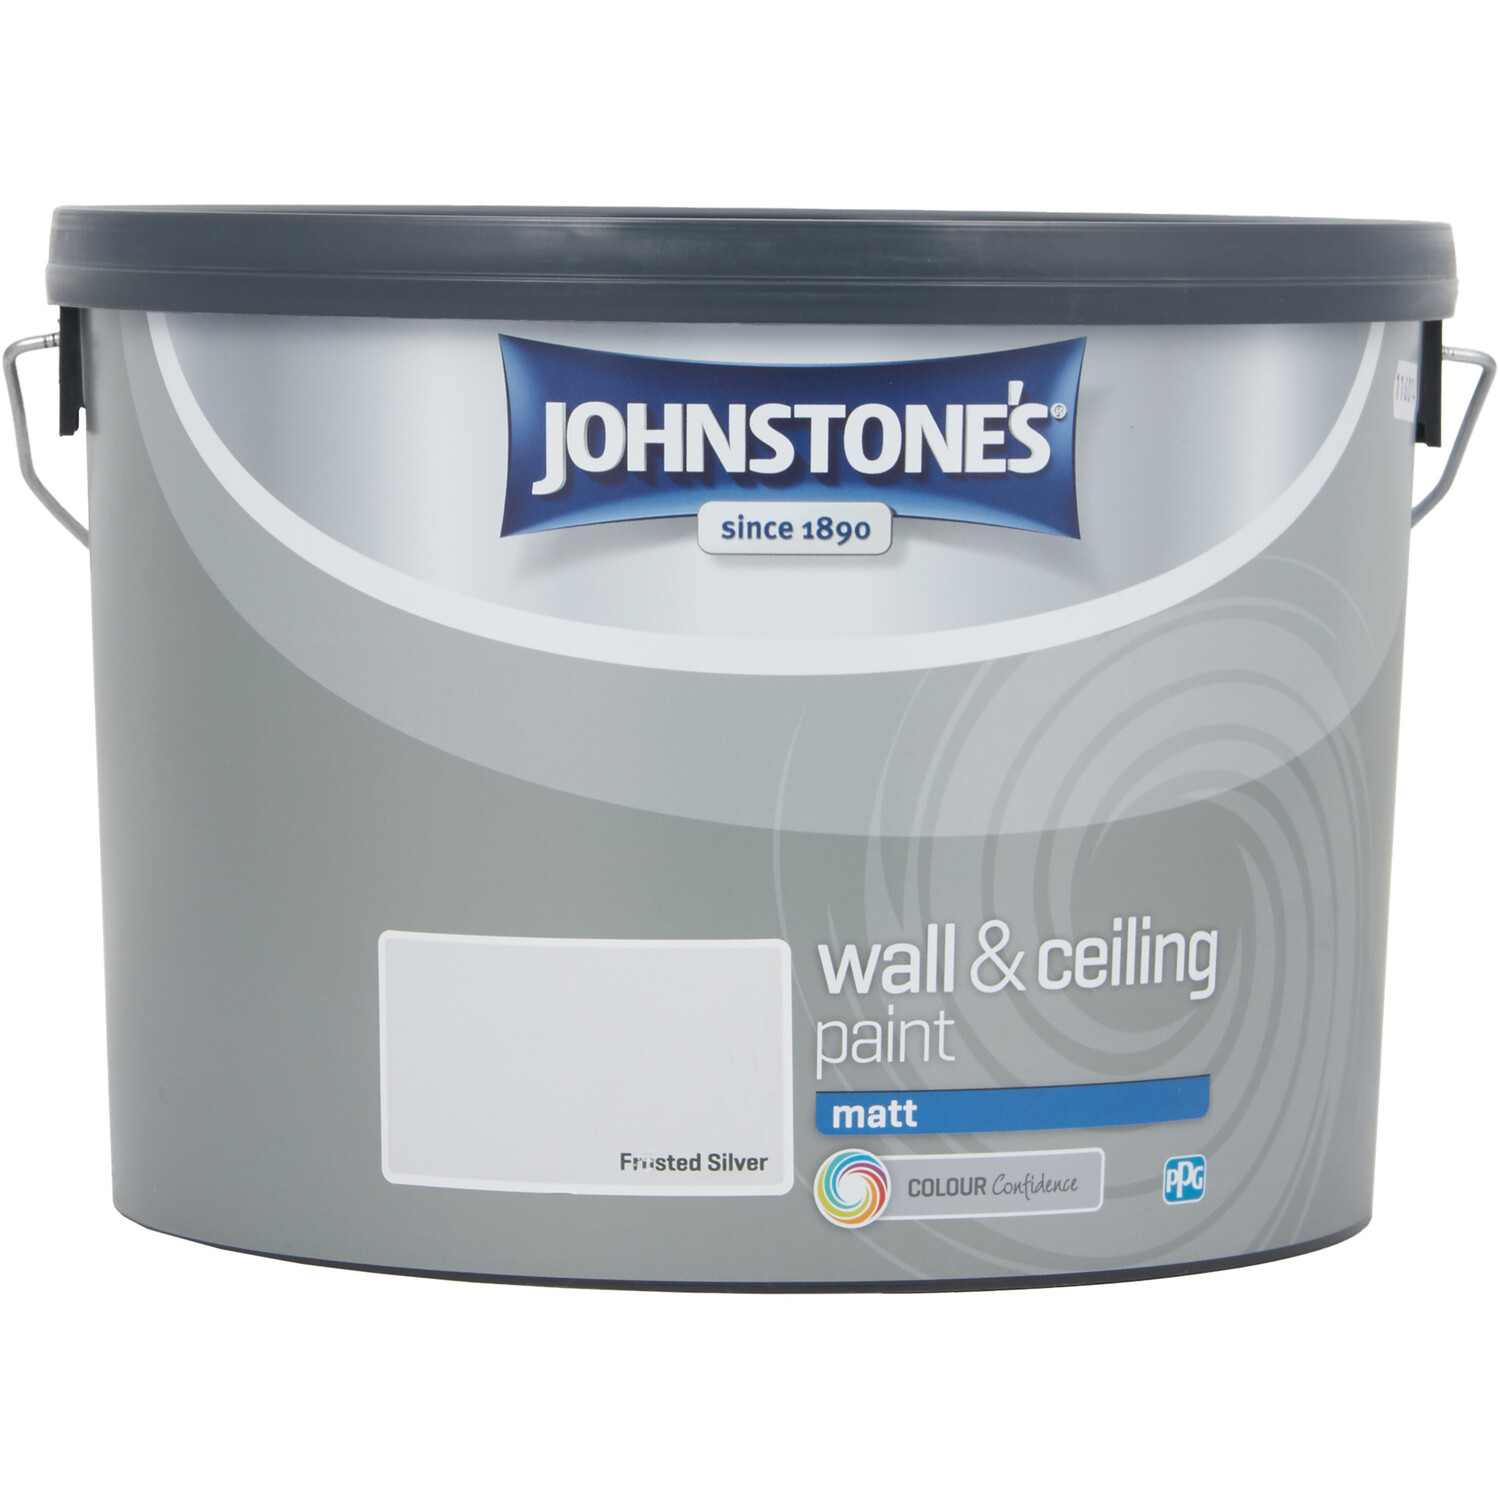 Johnstones Wall and Ceiling Paint Matt 10L - Frosted Silver Image 1